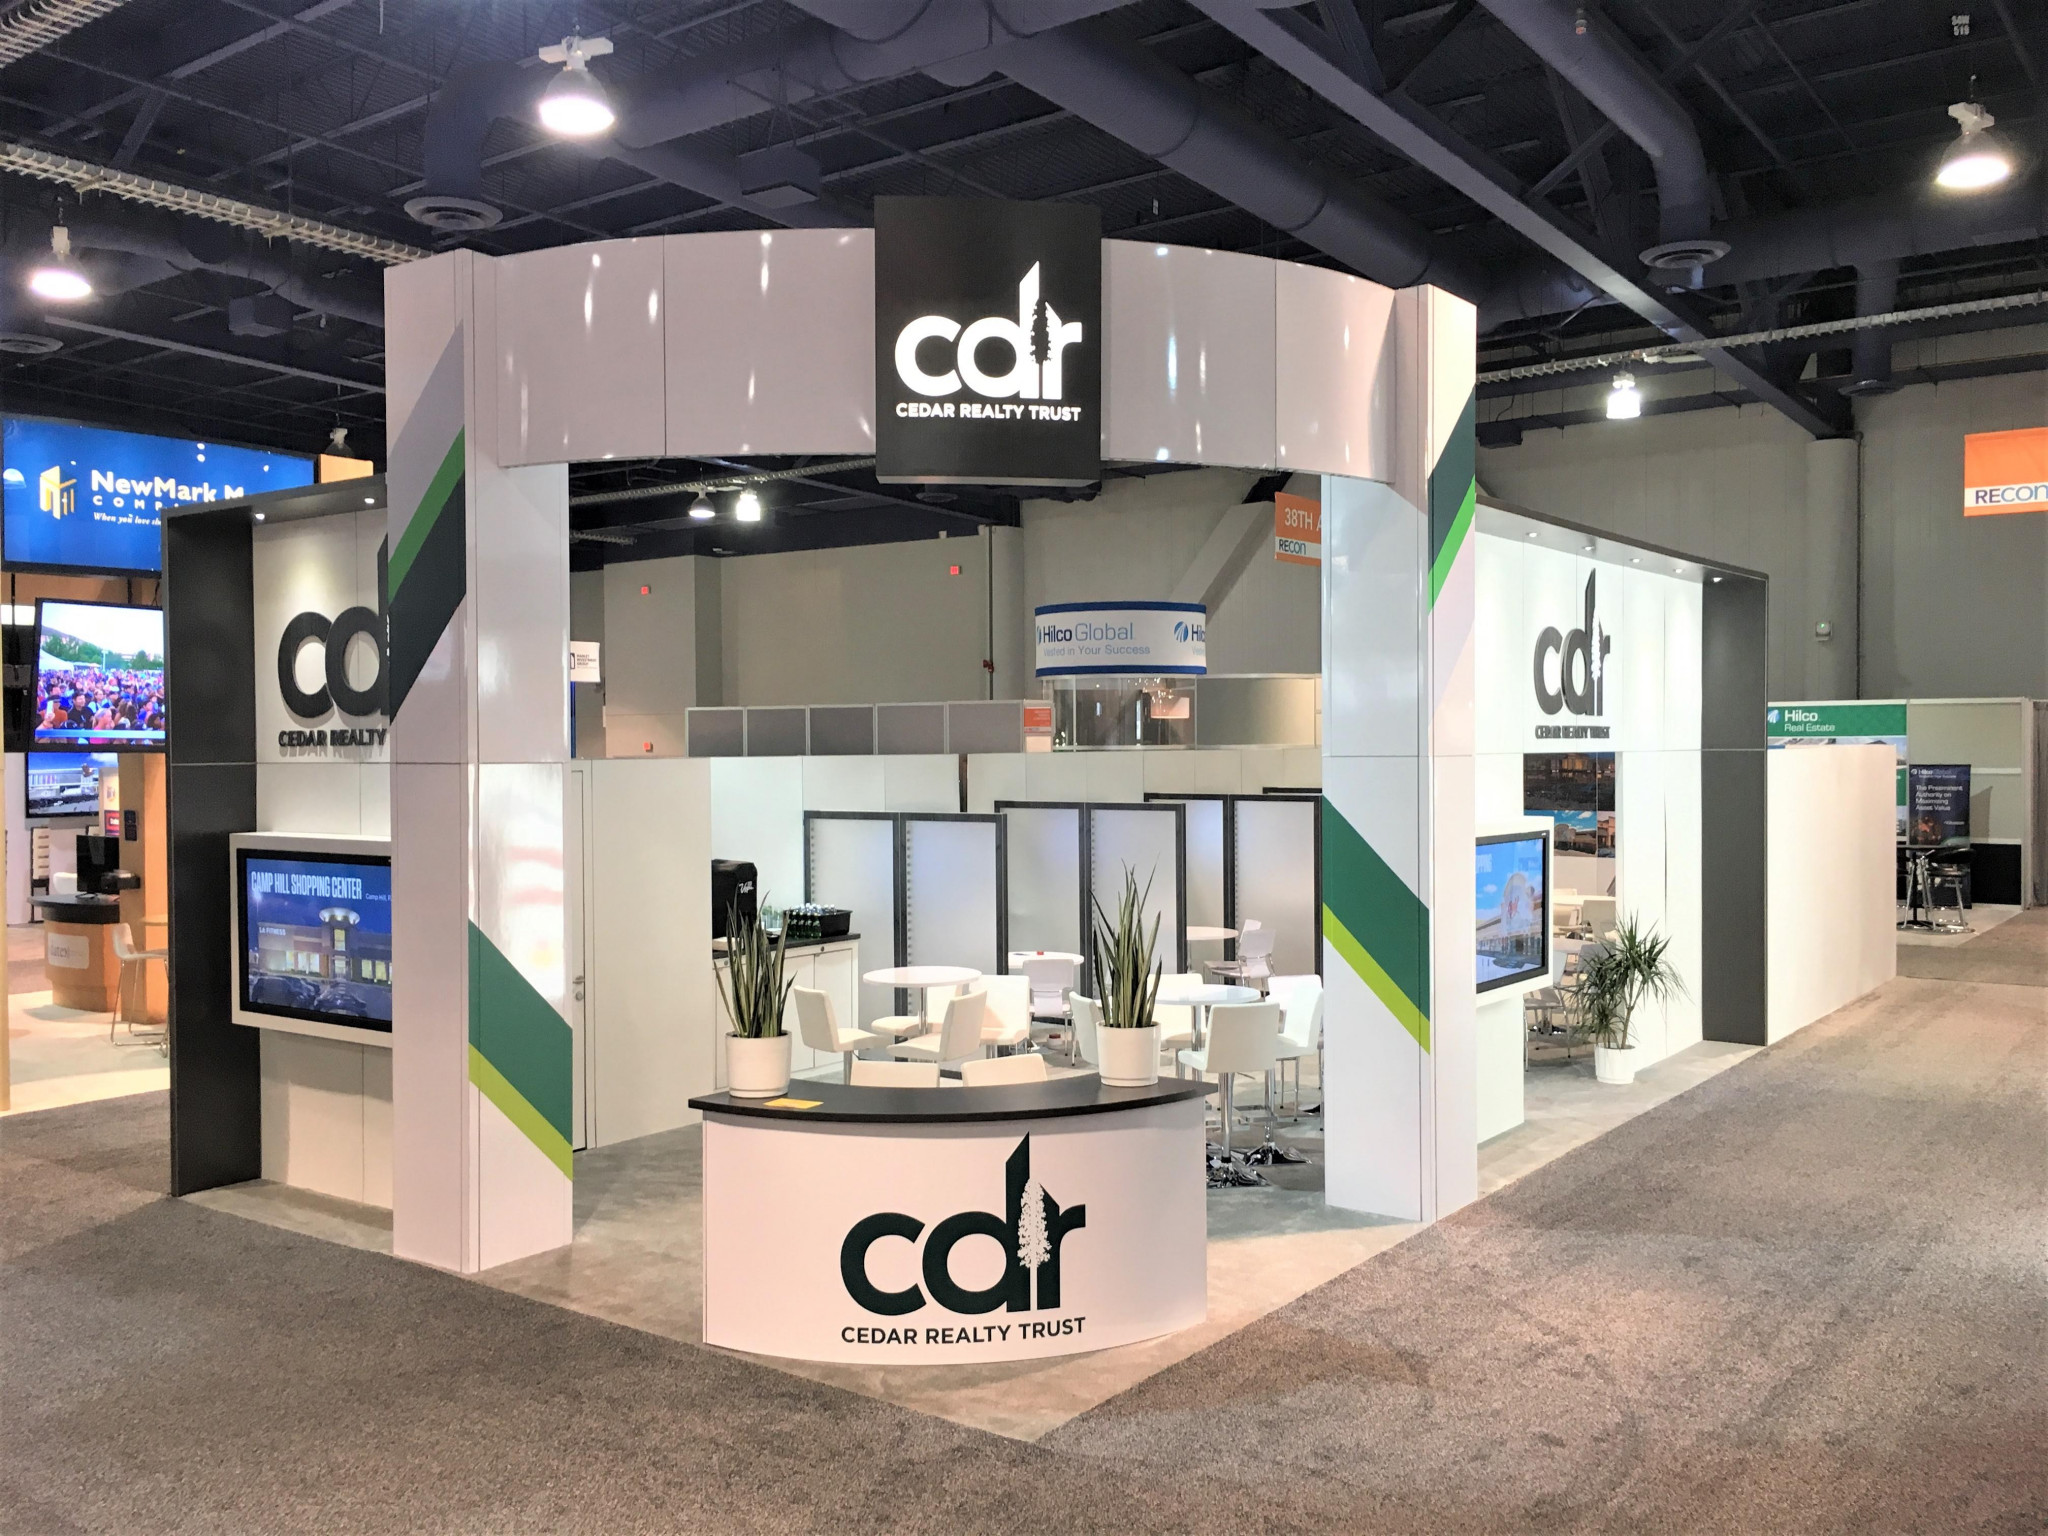 20x50 trade show booth